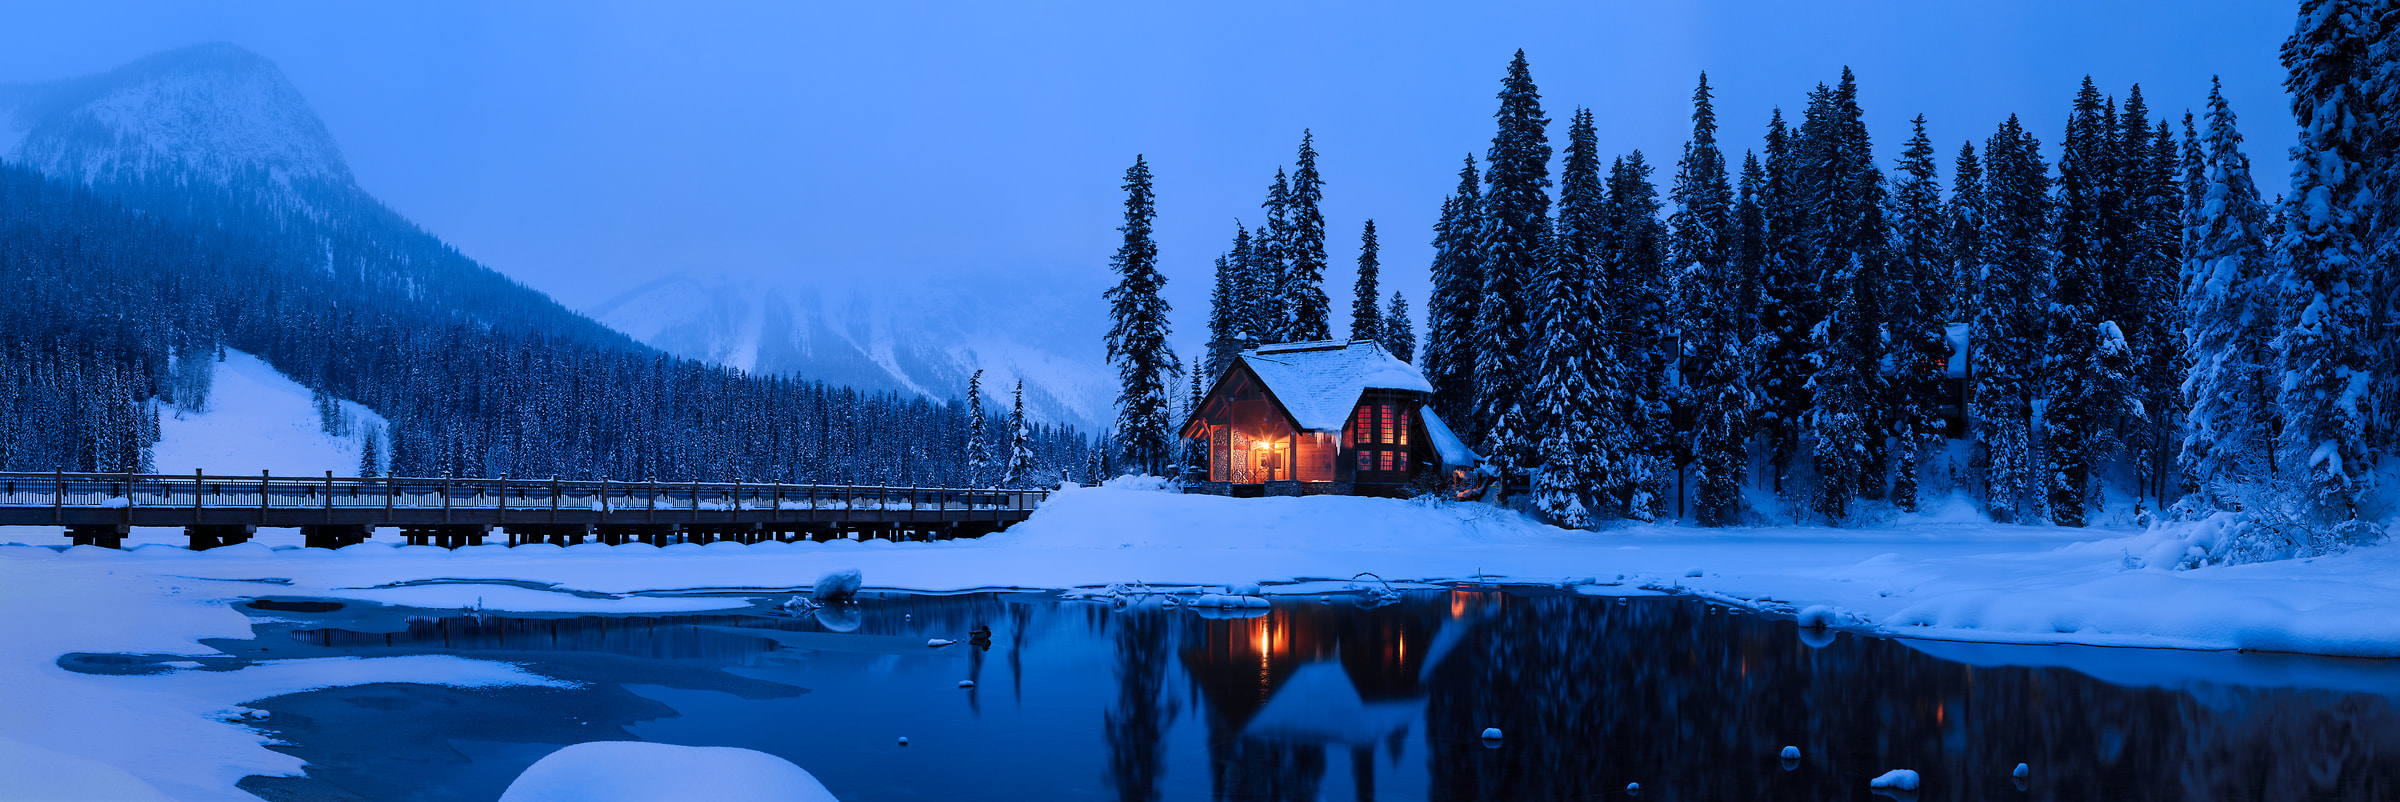 690 megapixels! A very high resolution, large-format VAST photo of a cozy winter scene with a snow covered forest, icy lake, a warm ski cabin in the woods, and snowy mountains; large-format photo print created at twilight by Scott Dimond in Yoho National Park, British Columbia, Canada.